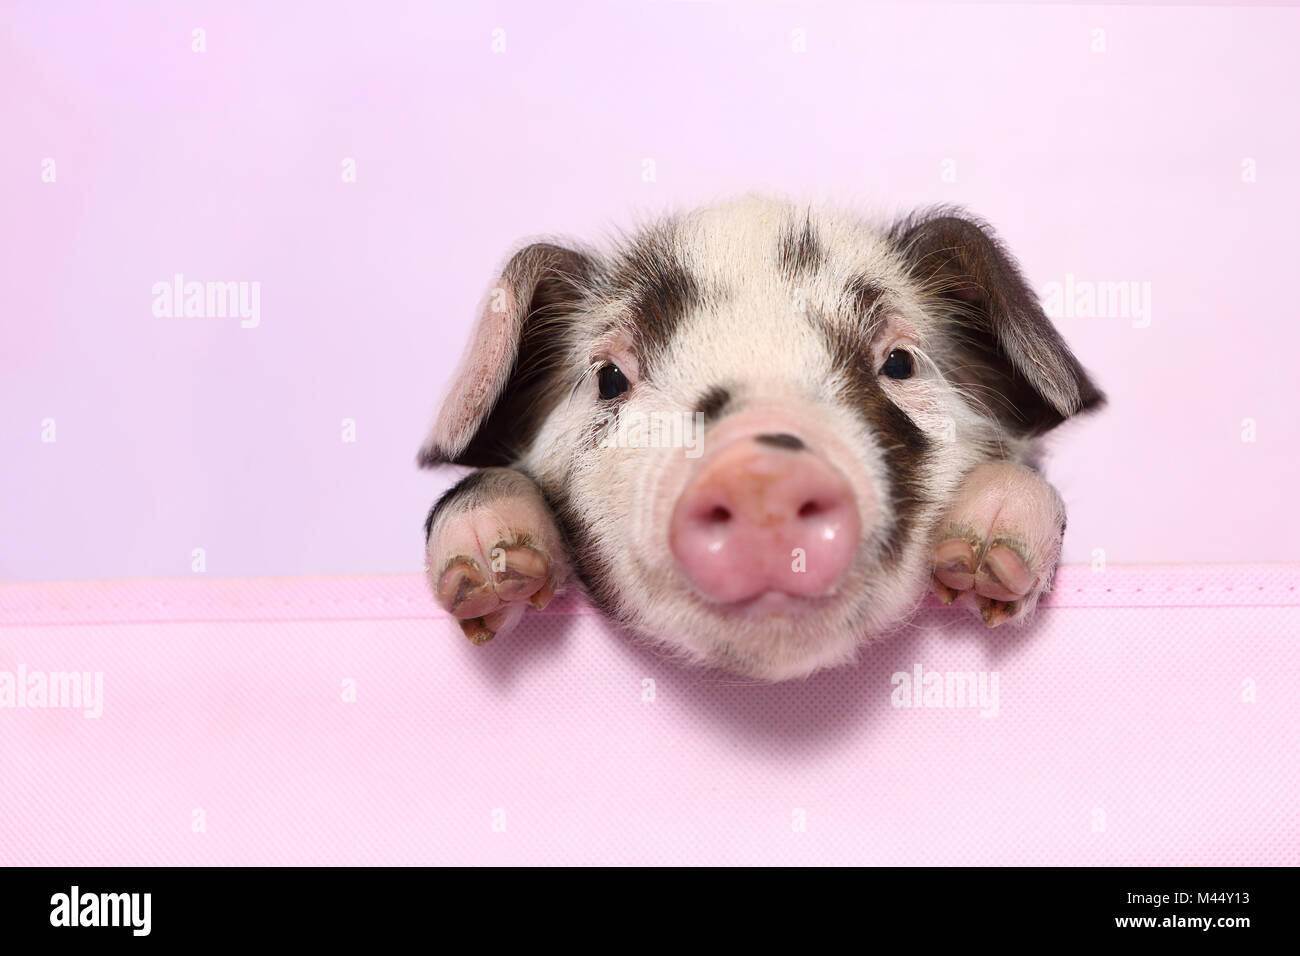 Domestic Pig, Turopolje x ?. Piglet (4 weeks old) lying. Studio picture seen against a pink background. Germany Stock Photo